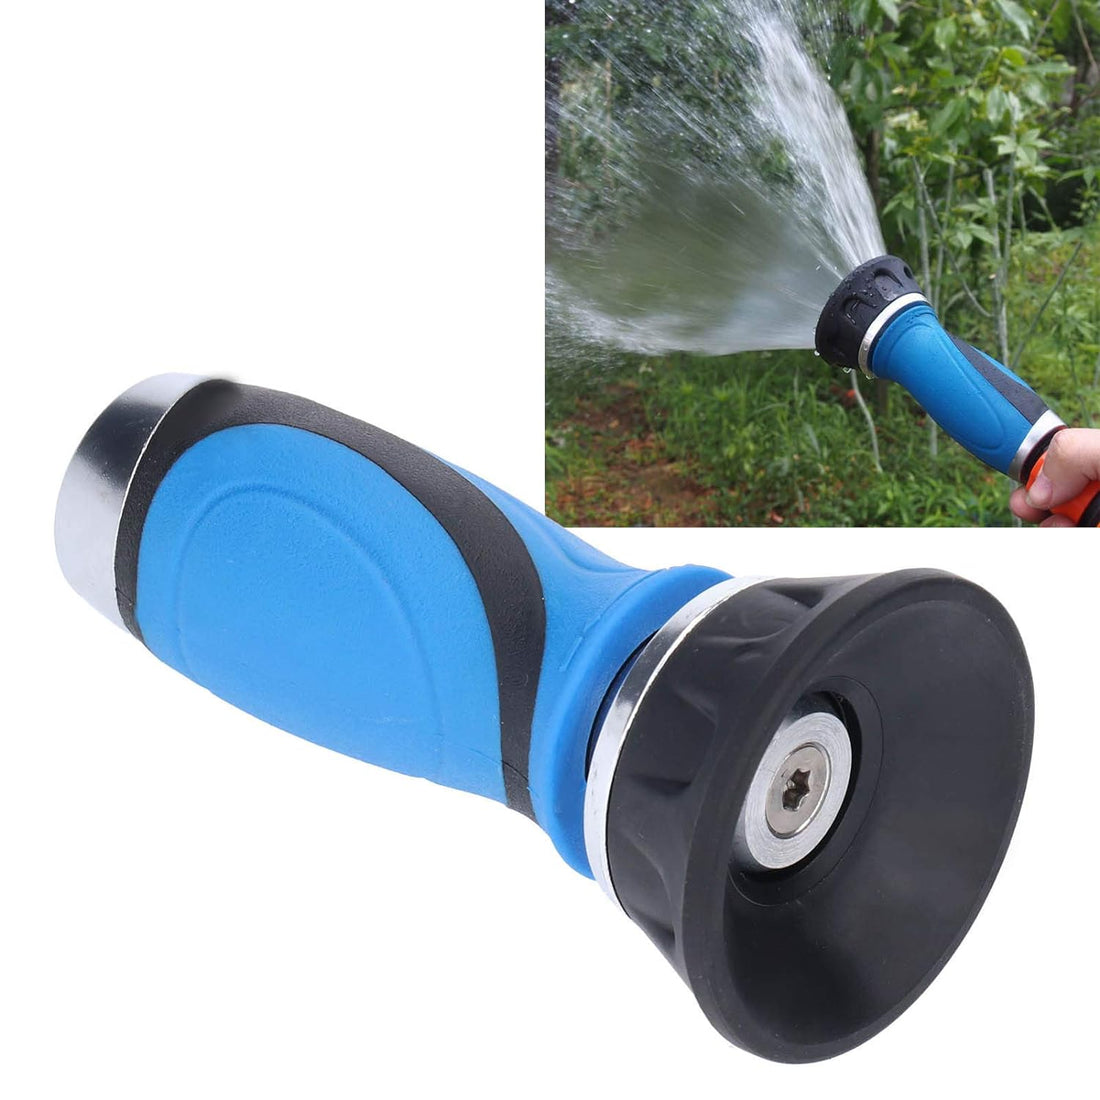 Fireman Style Nozzle, High Pressure Nozzle America Fire Fighting Style Watering Hose Sprayer Nozzle for Home Garden Lawn, Watering Nozzles